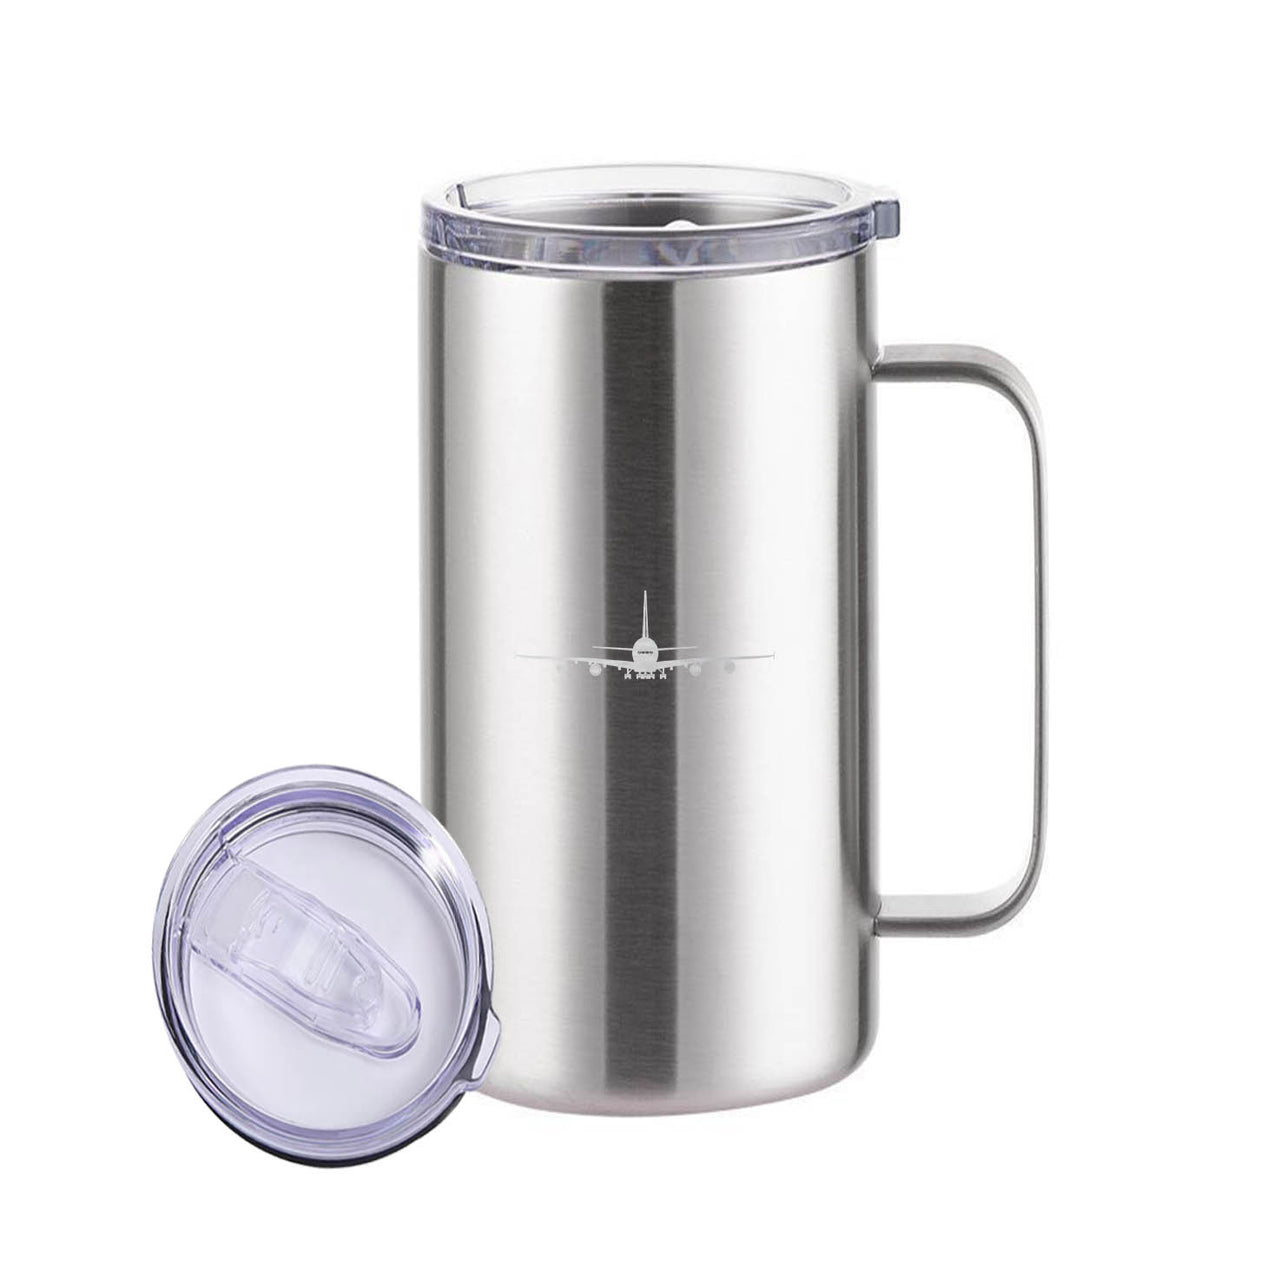 Airbus A380 Silhouette Designed Stainless Steel Beer Mugs